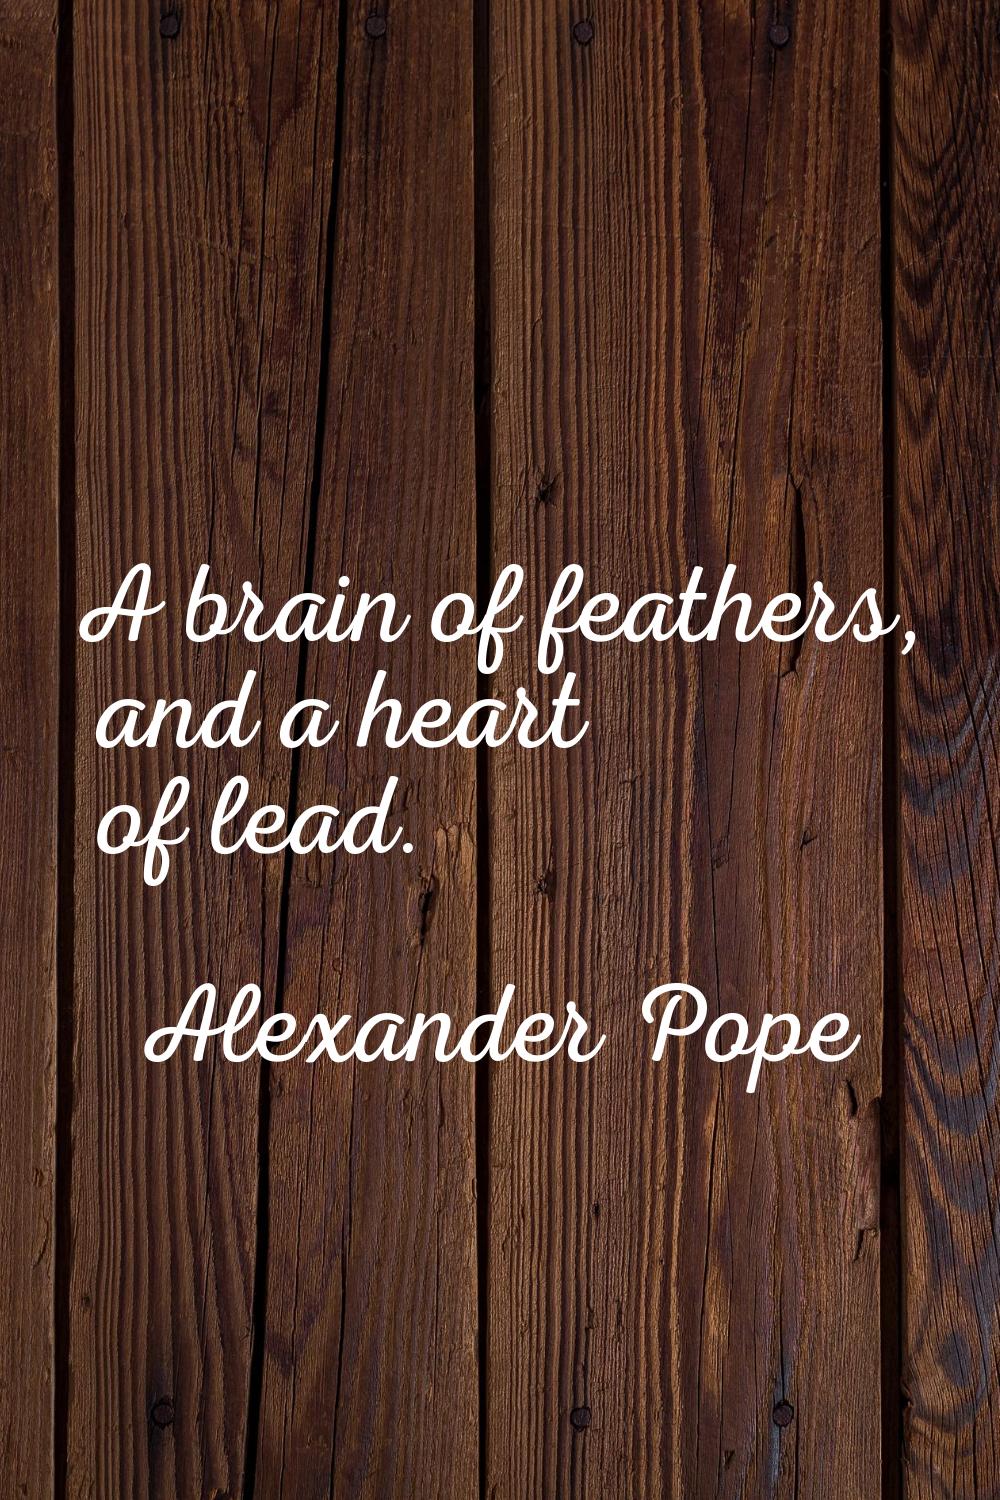 A brain of feathers, and a heart of lead.